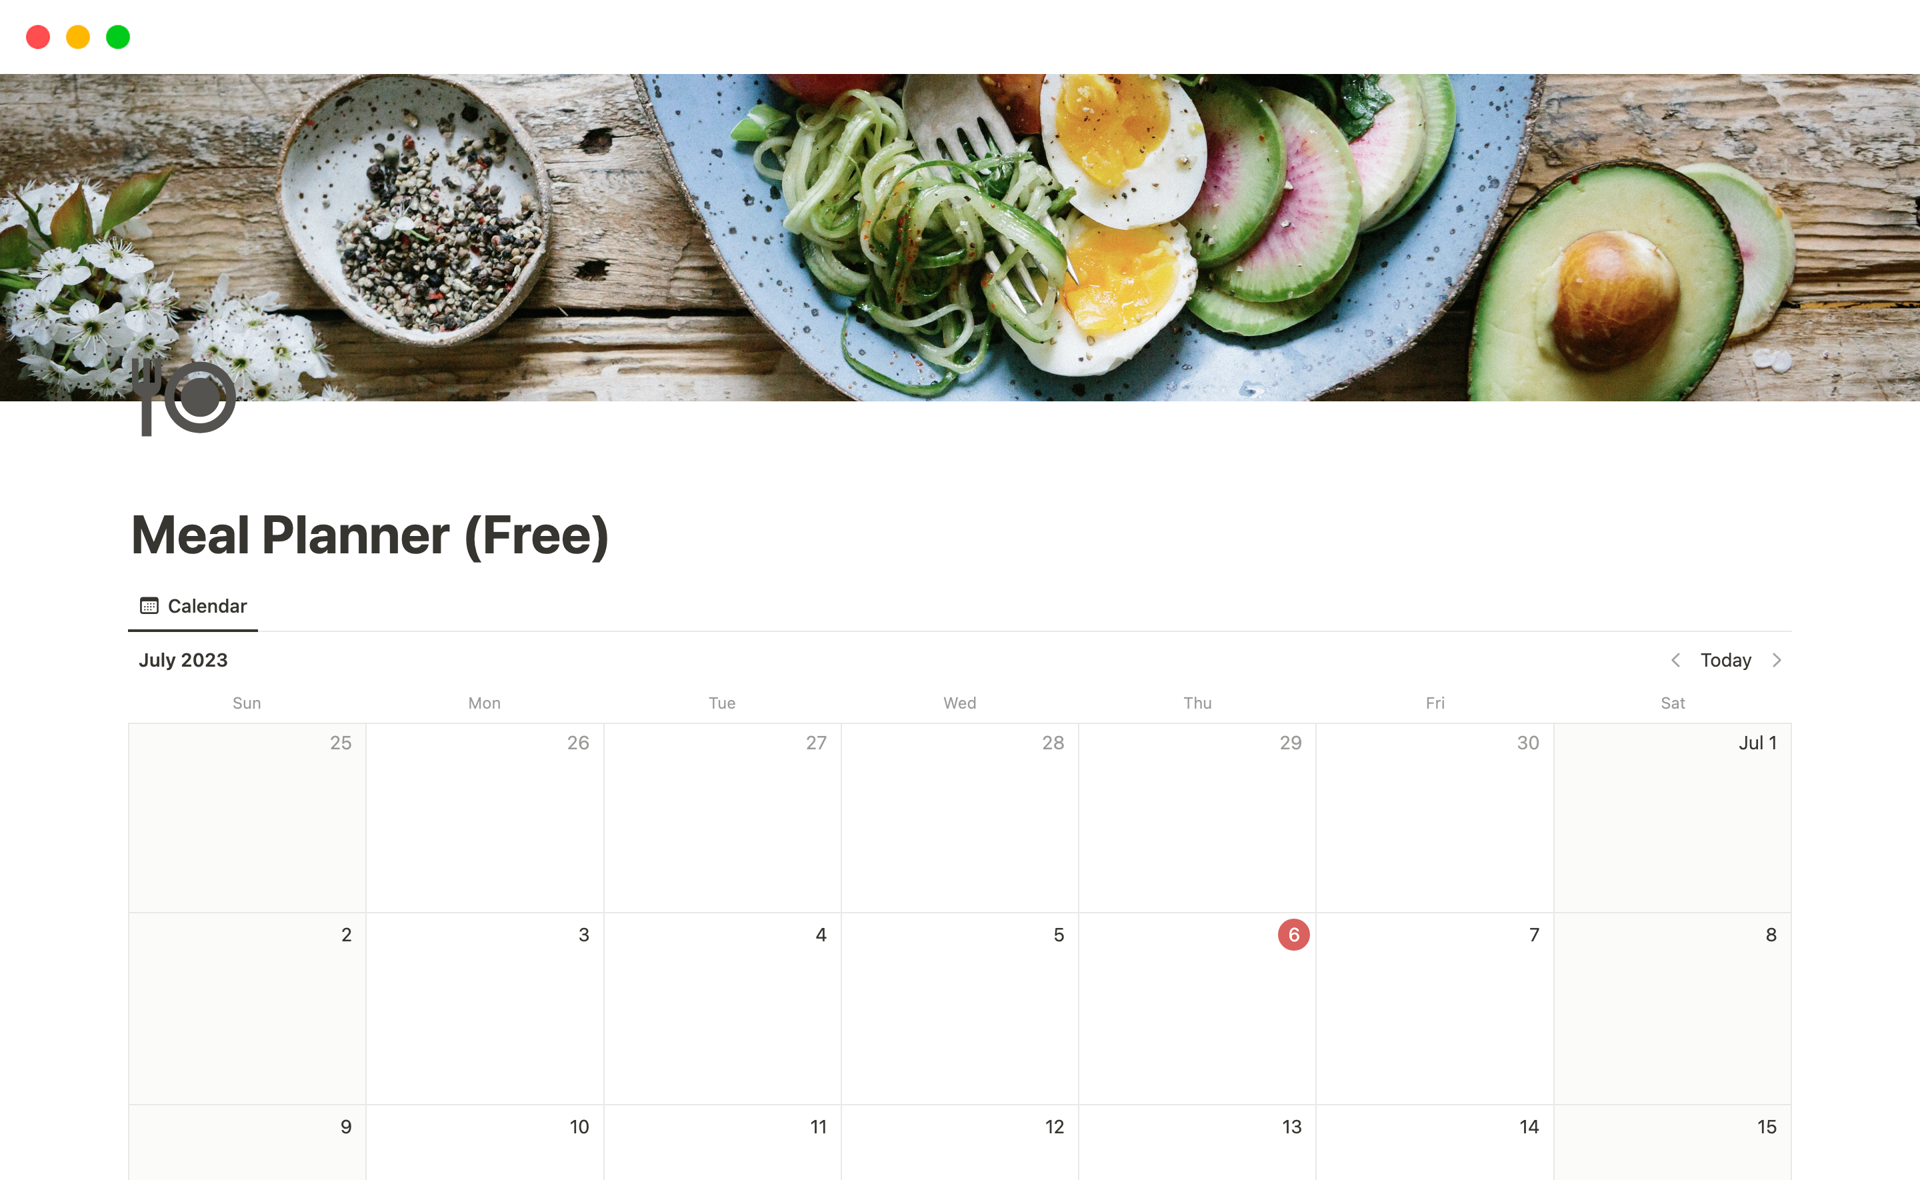 Plan and organize your meals, make your life easier with this Free Template!